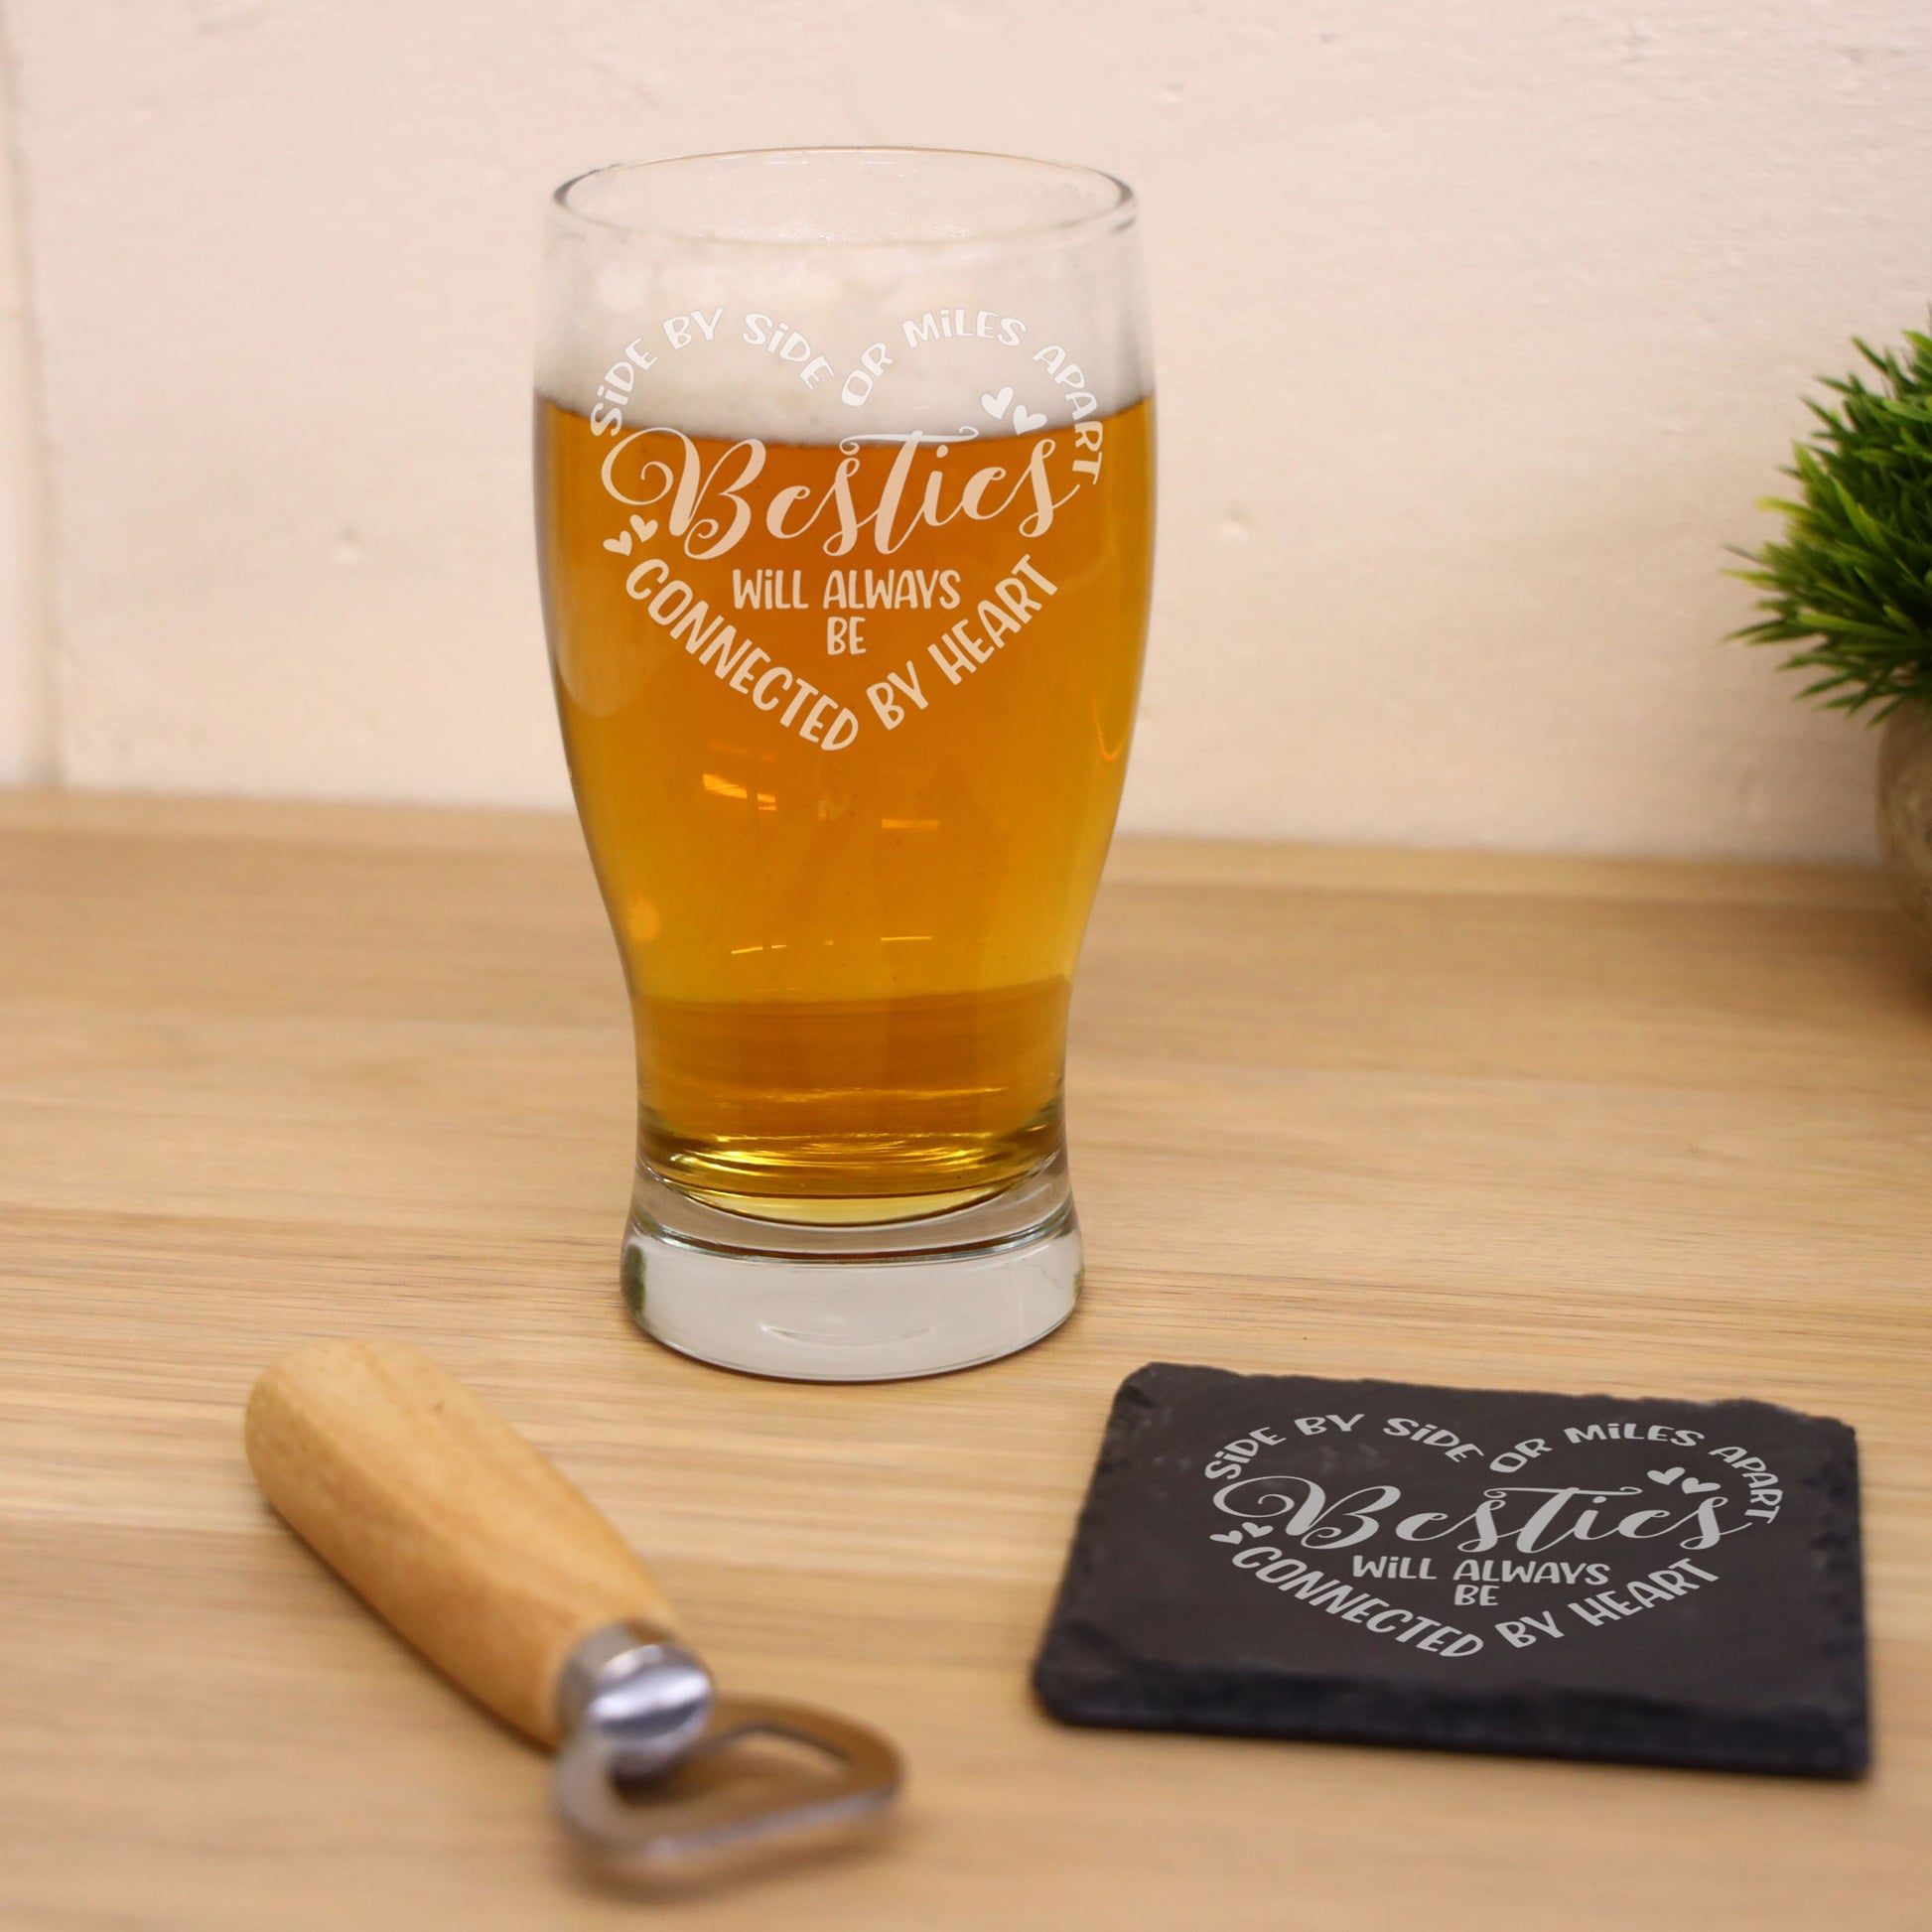 Besties Connected By Heart Engraved Beer Glass and/or Coaster Set  - Always Looking Good - Glass & Square Coaster Set  